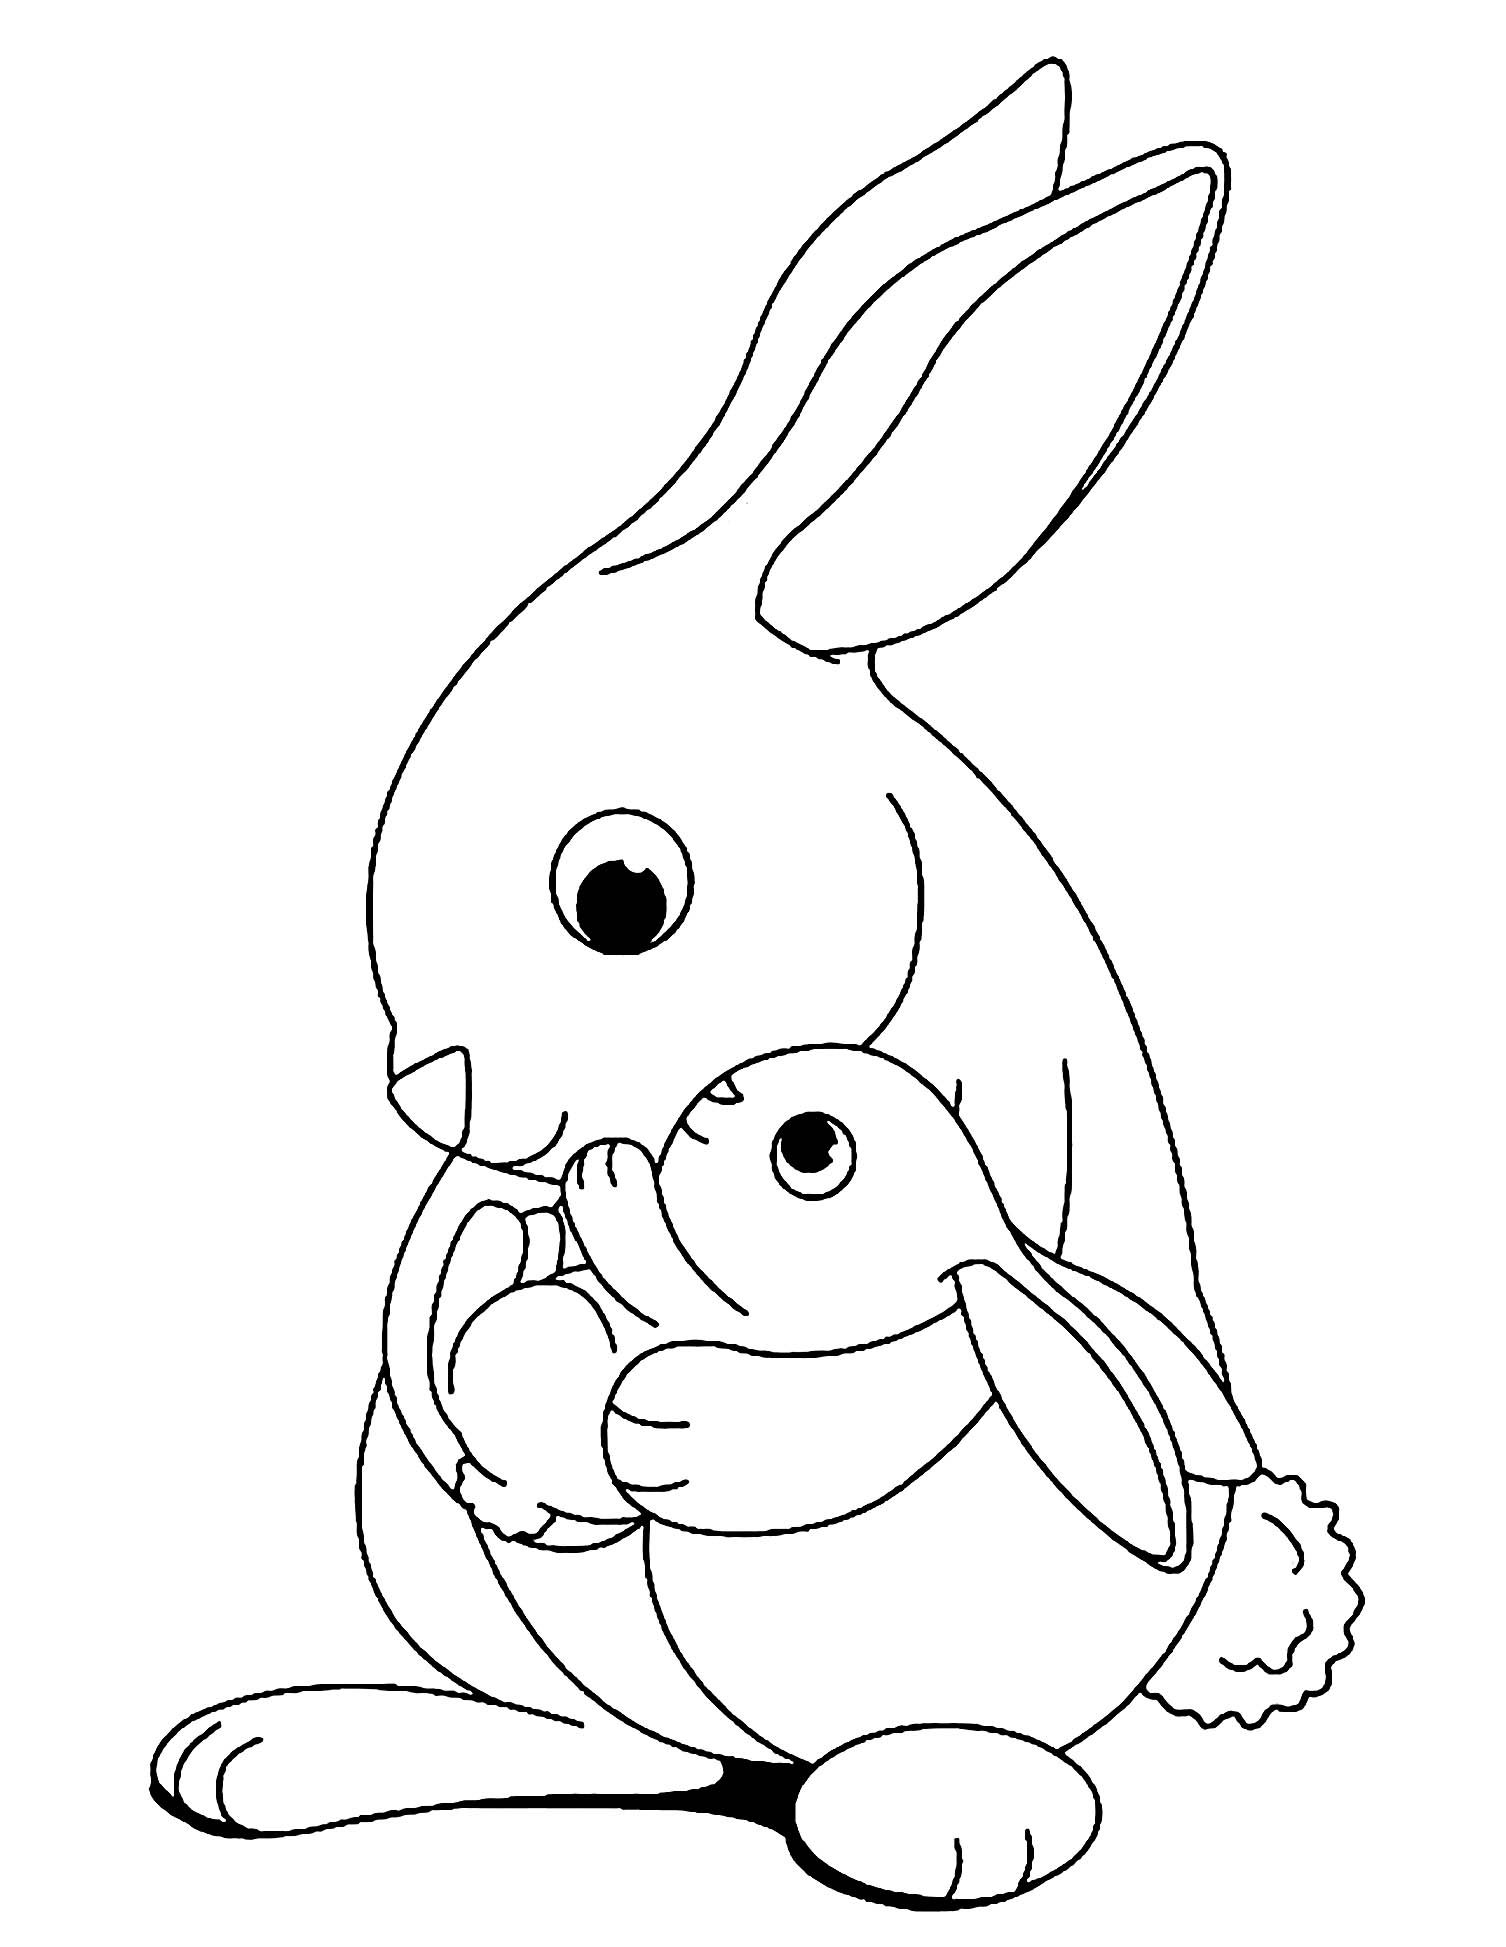 Download Rabbit To Print For Free Rabbit Kids Coloring Pages